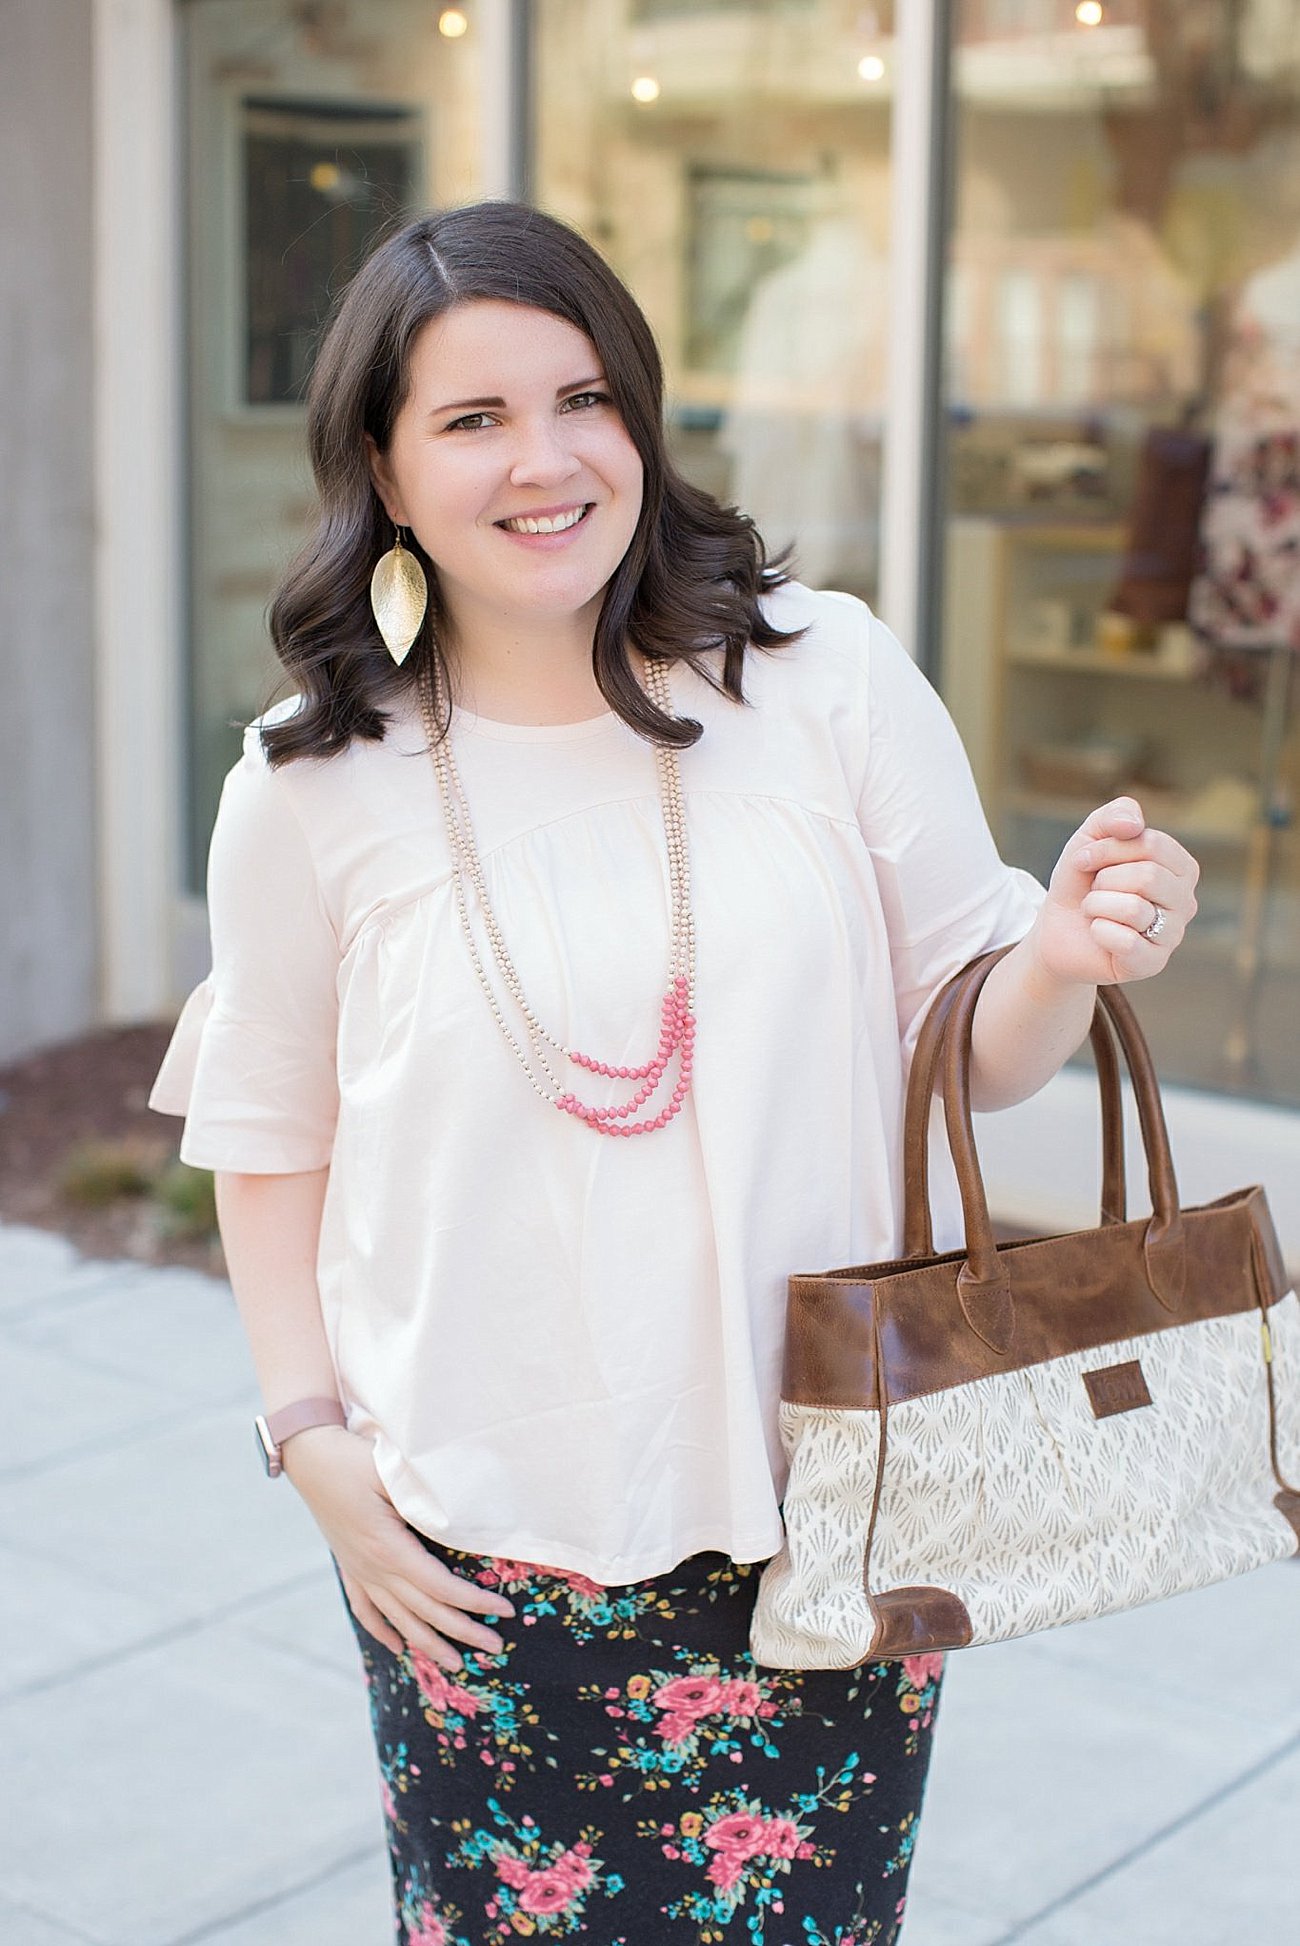 Spring Has Sprung - Ethical Fashion Spring Ideas by fashion blogger Still Being Molly